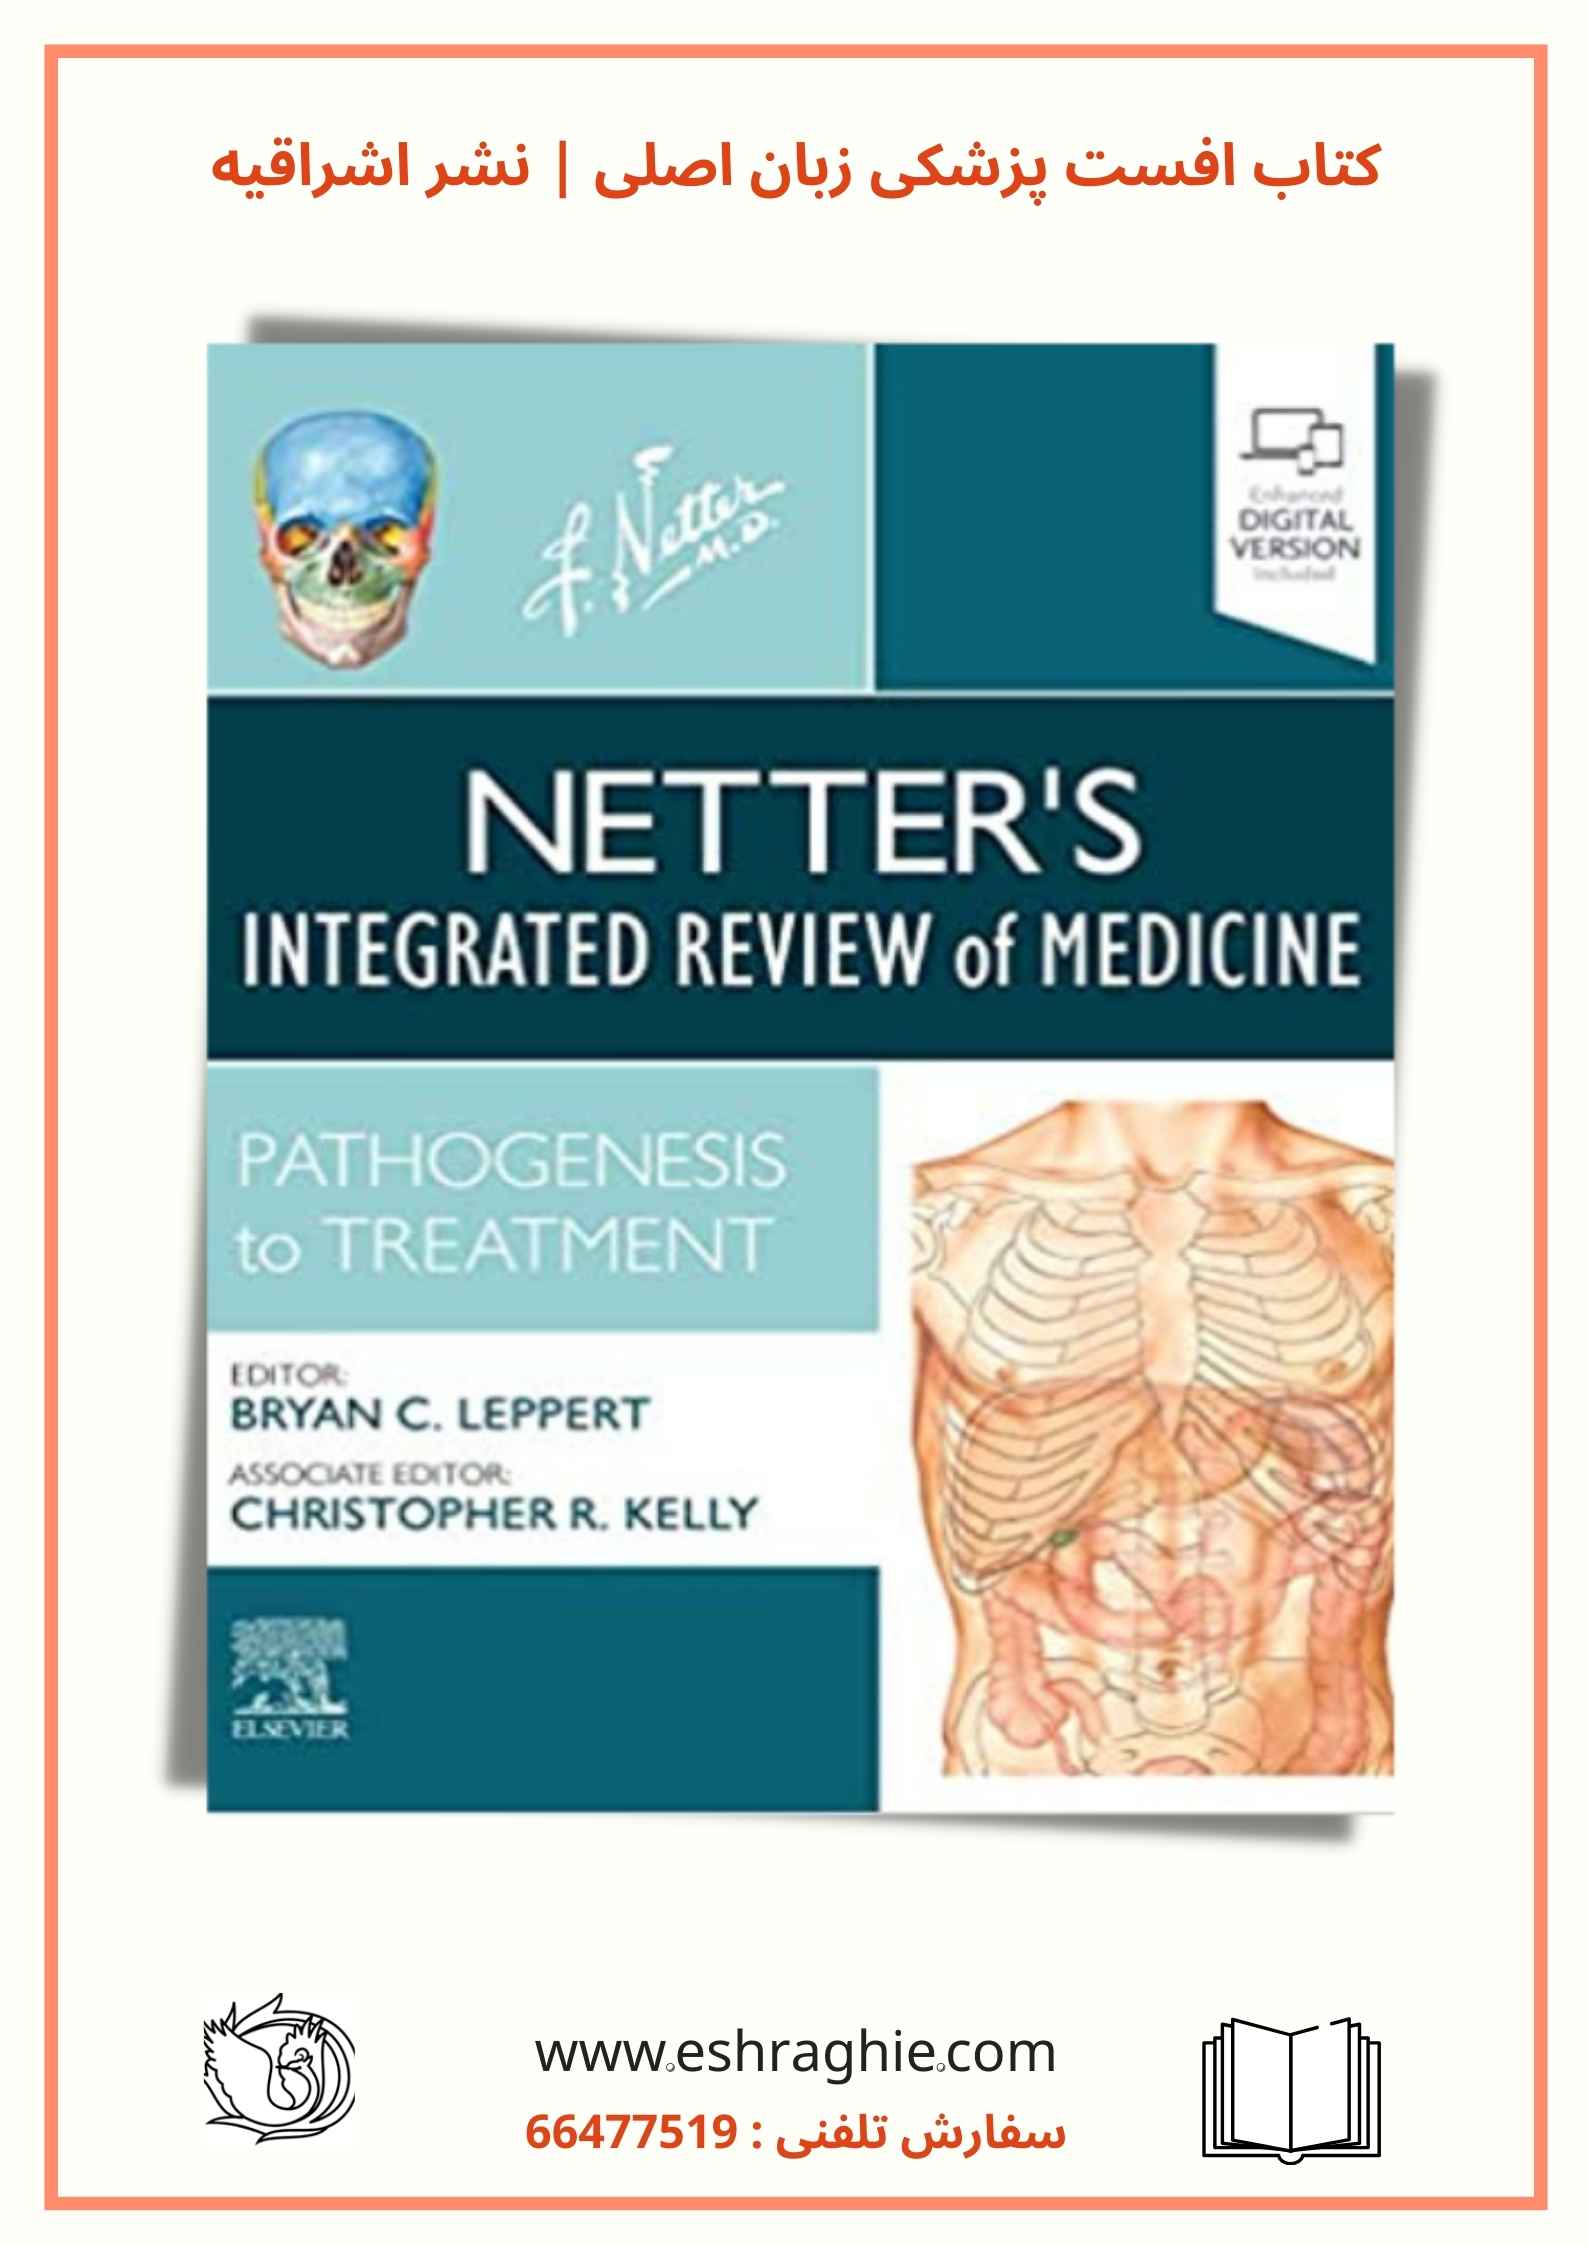 Netter's Integrated Review of Medicine : Pathogenesis to Treatment